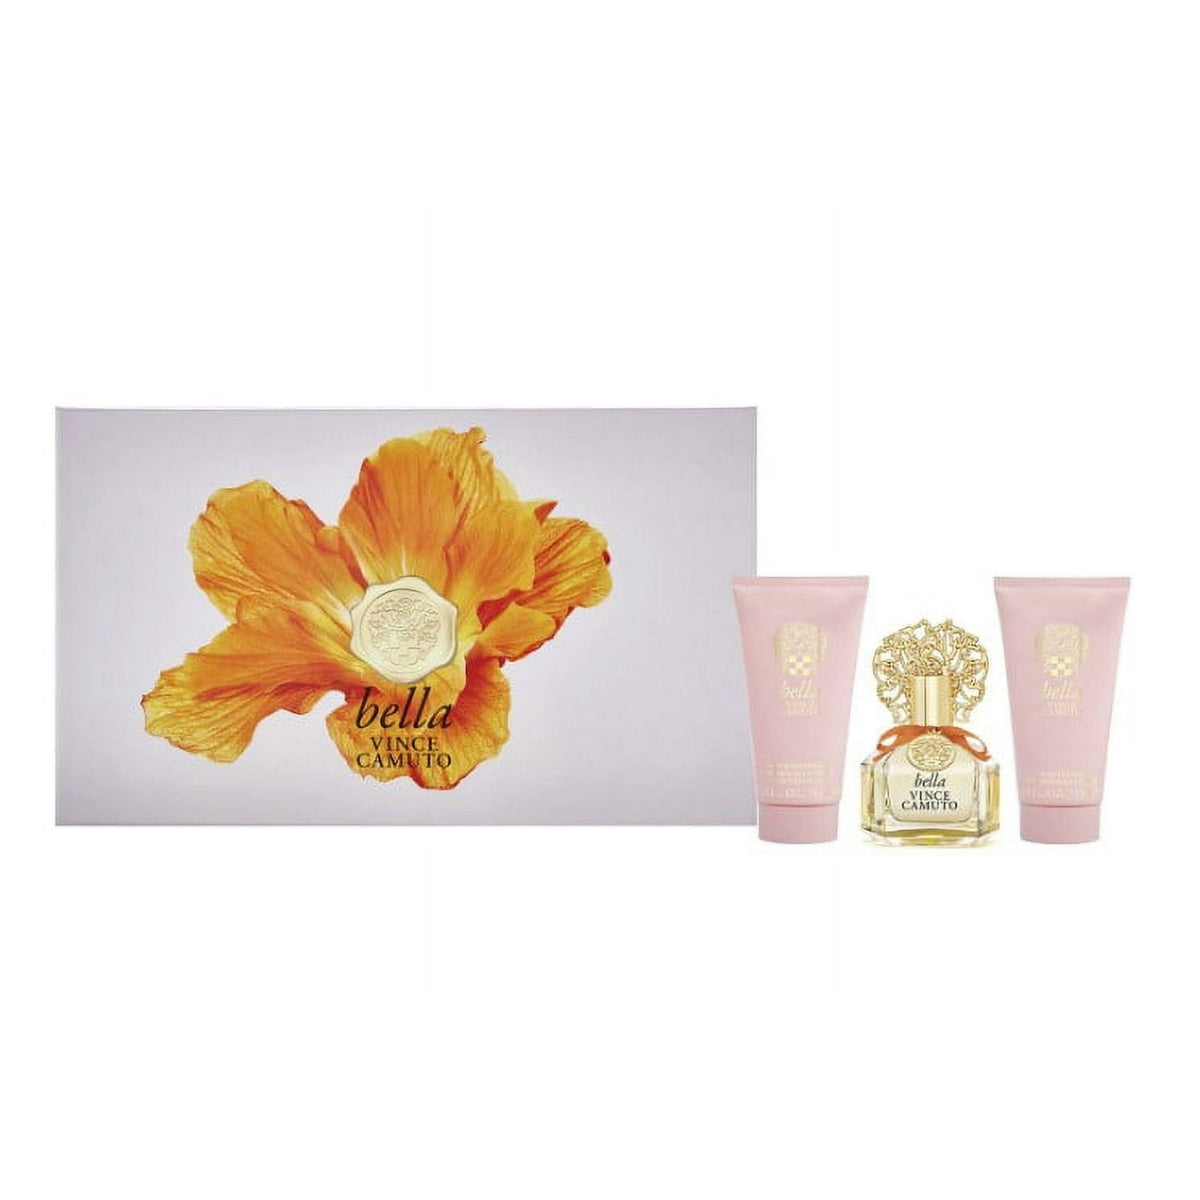 Copy of Vince Camuto Bella Gift Set 3-Piece 1.7 EDP – Hair Care